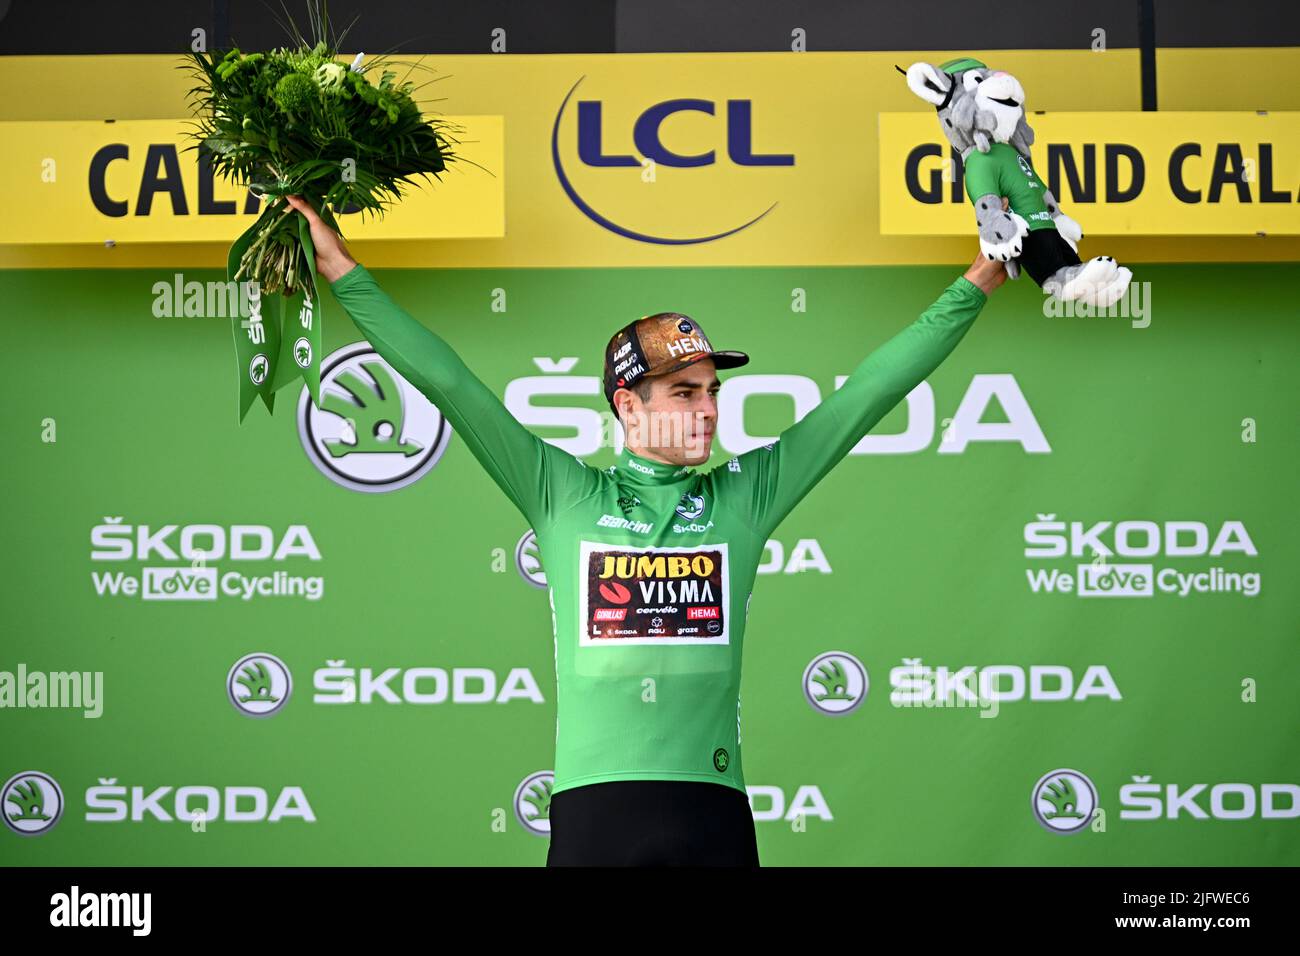 Calais, France,05 July 2022. Belgian Wout Van Aert of Team Jumbo-Visma celebrates in the green jersey of leader in the points ranking after stage four of the Tour de France cycling race, a 171.5 km race from Dunkerque to Calais, France on Tuesday 05 July 2022. This year's Tour de France takes place from 01 to 24 July 2022. BELGA PHOTO JASPER JACOBS - UK OUT Stock Photo